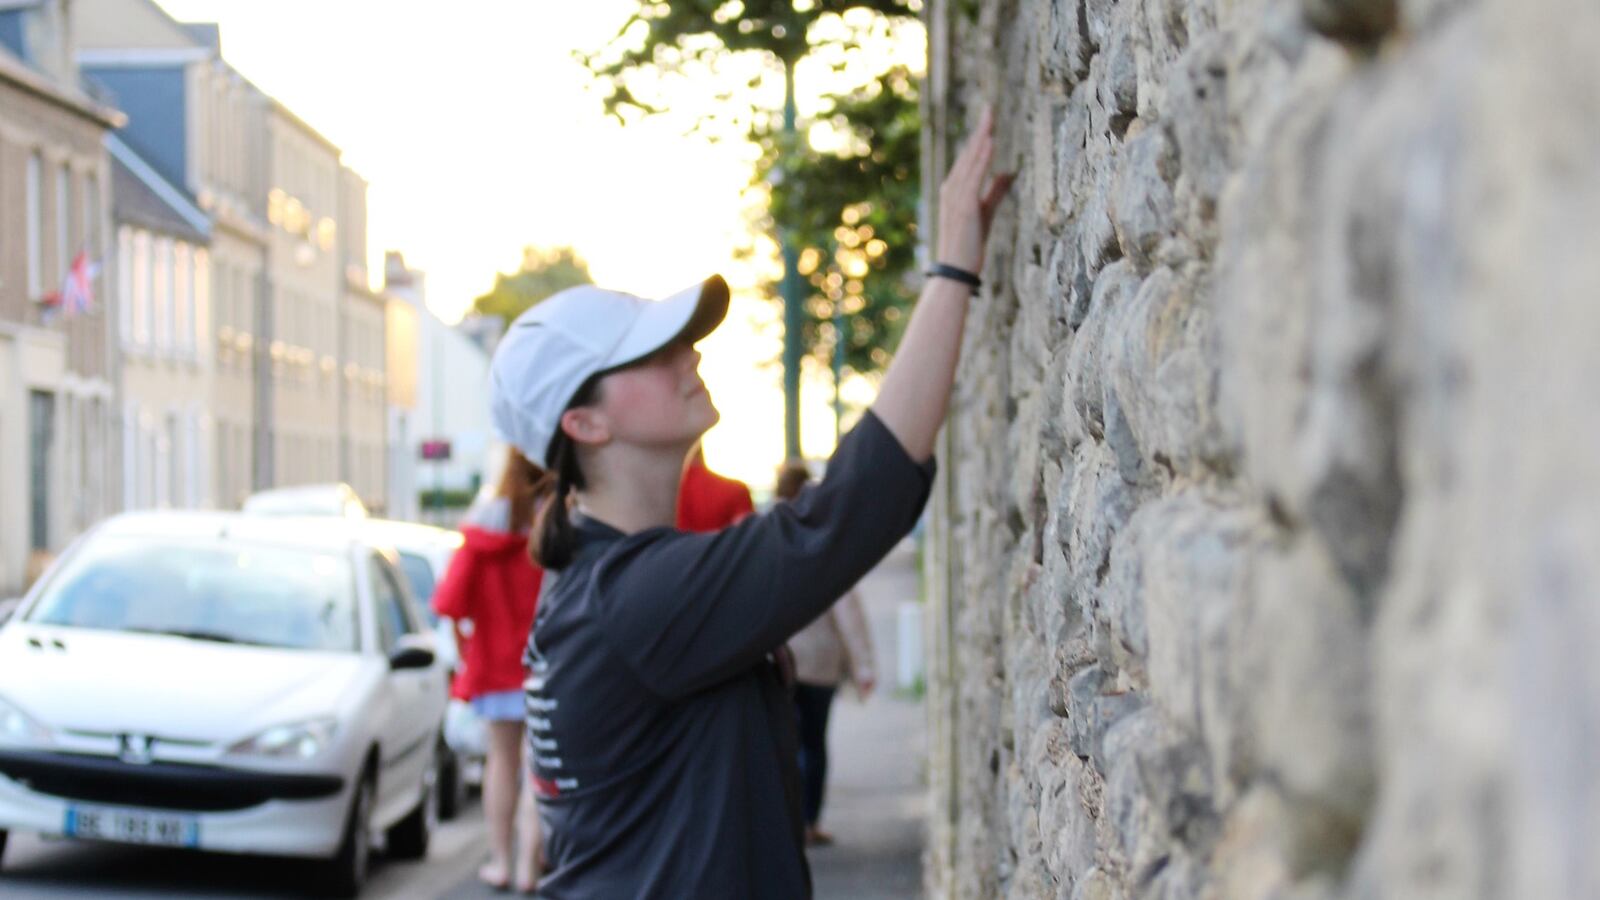 Whitney Joyner got to explore history firsthand during a 2015 trip to Bayeux, France, the first city to be liberated in the Battle of Normandy during World War II.